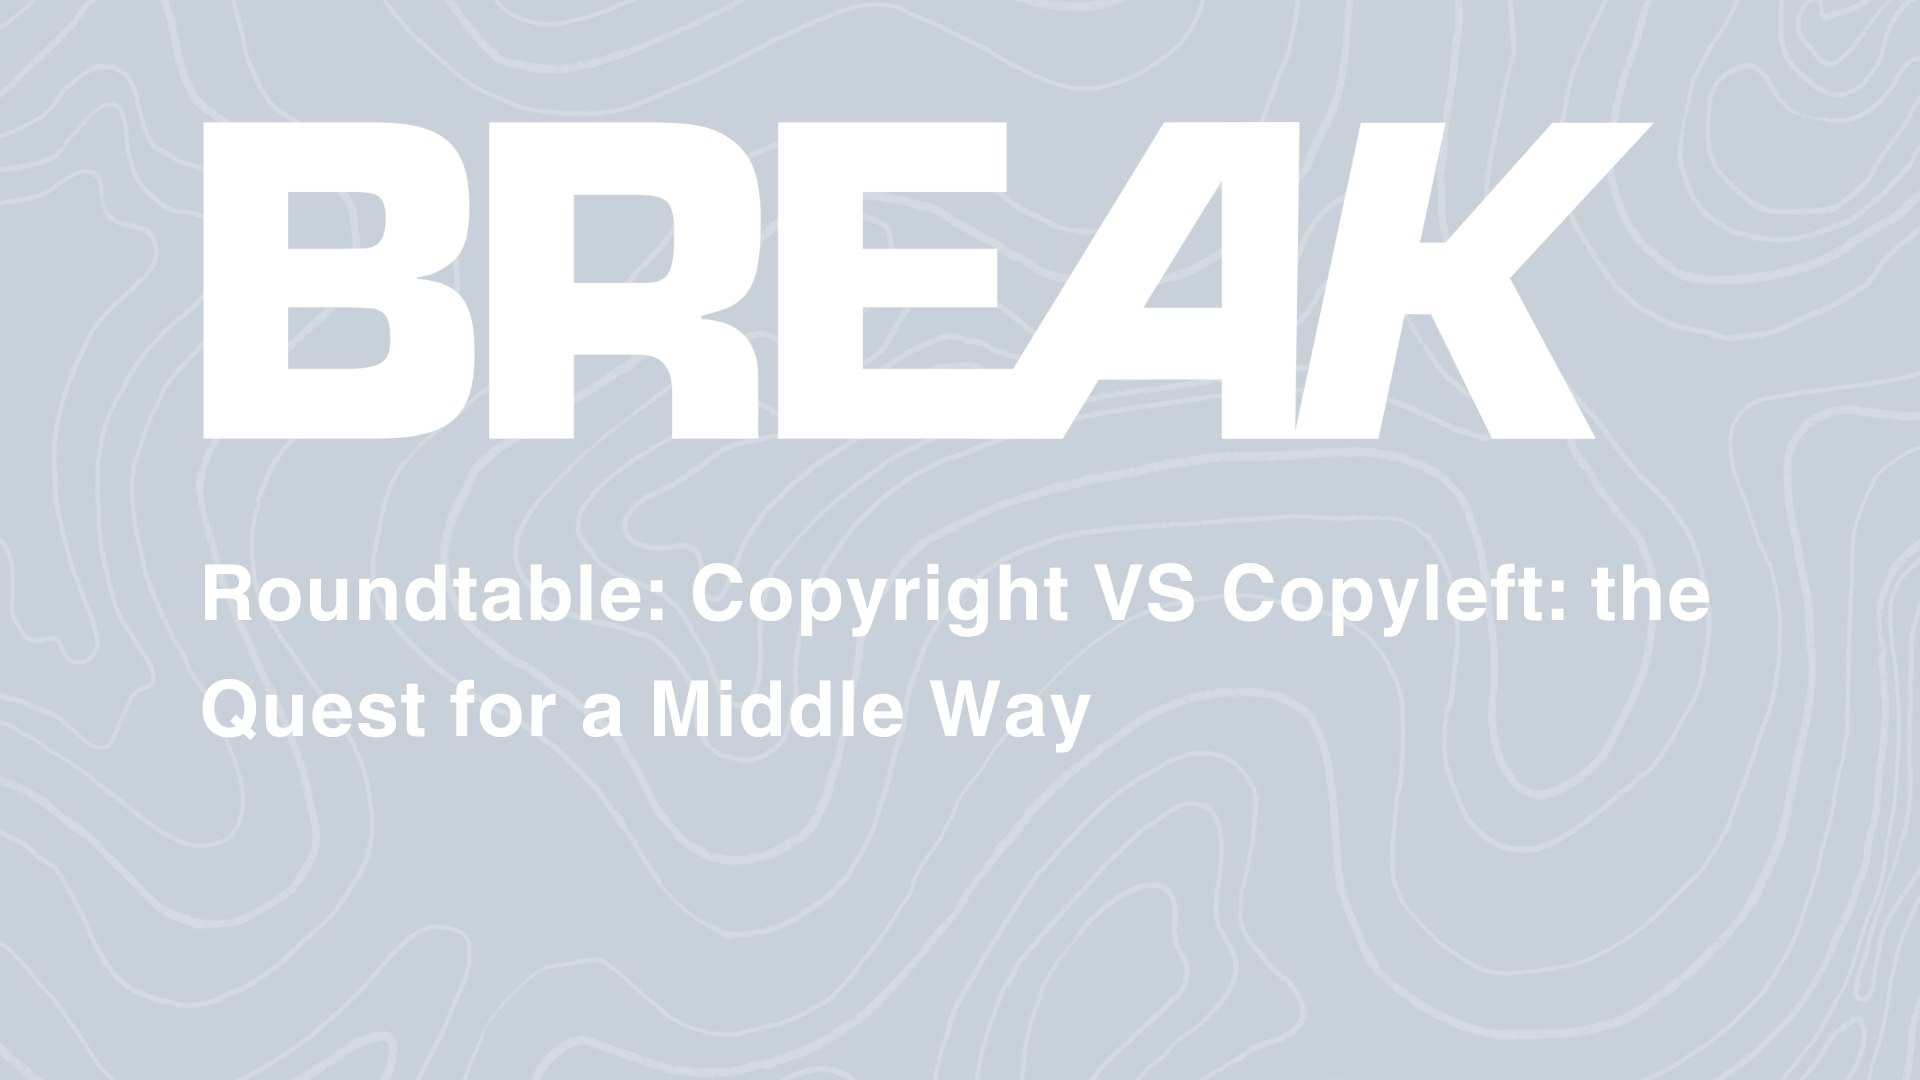 BREAK2023 // Copyright VS Copyleft: the Quest for a Middle Way // Roundtable